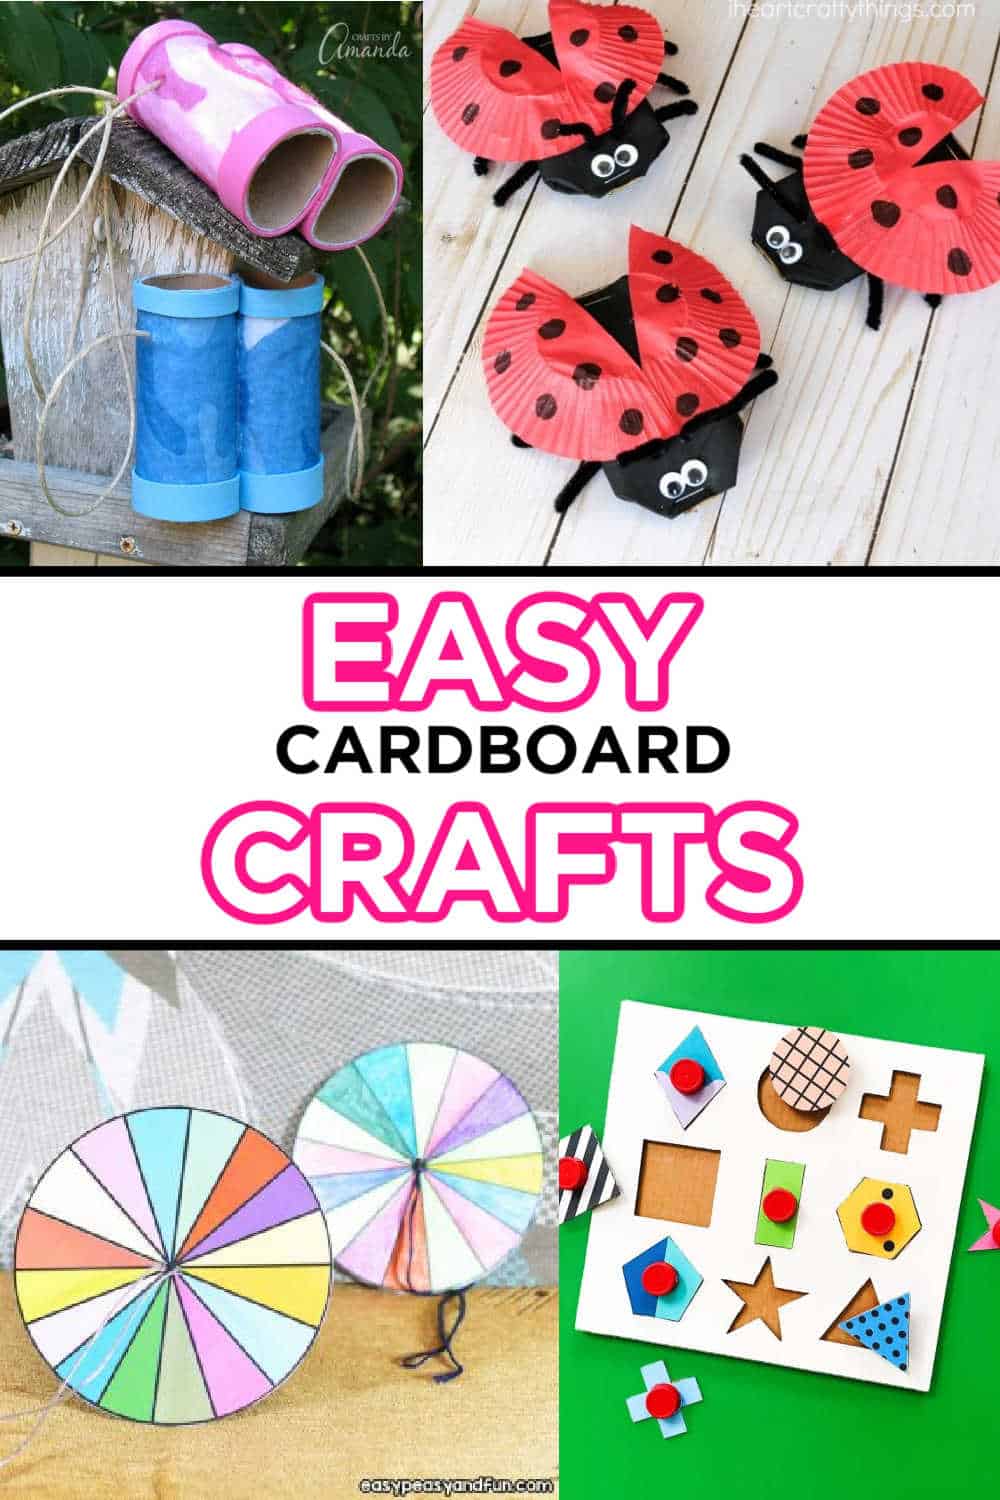 Homemade cardboard toys for kids to make and play with - The Craft Train